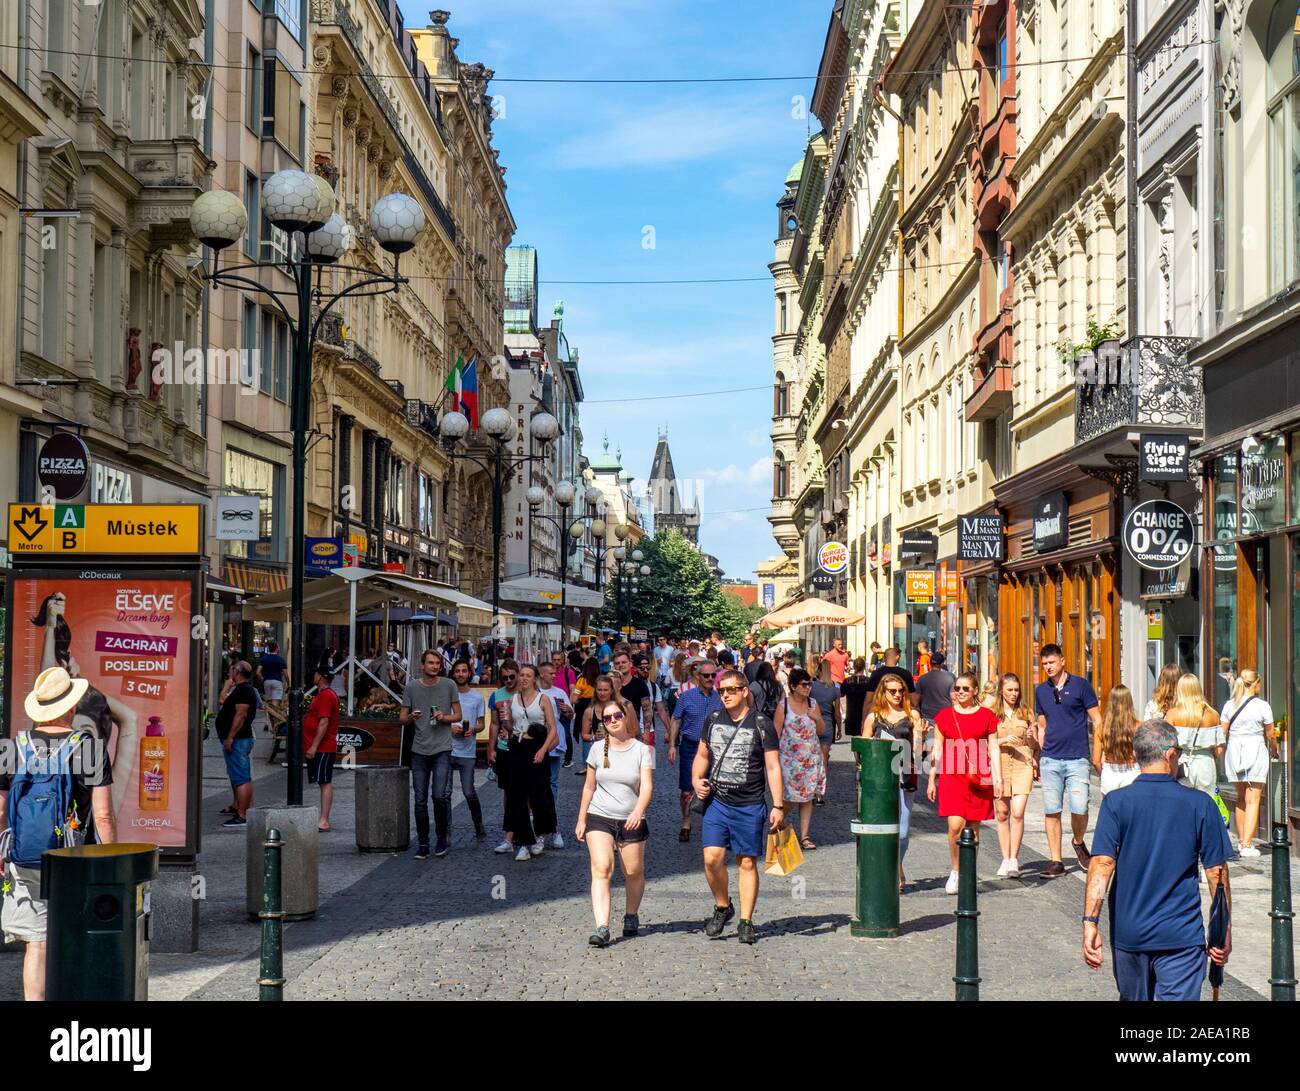 Crowds of tourists walking along cobblestone 28. Října street lined with touristic shops and cafes Old Town Prague Czech Republic. Stock Photo